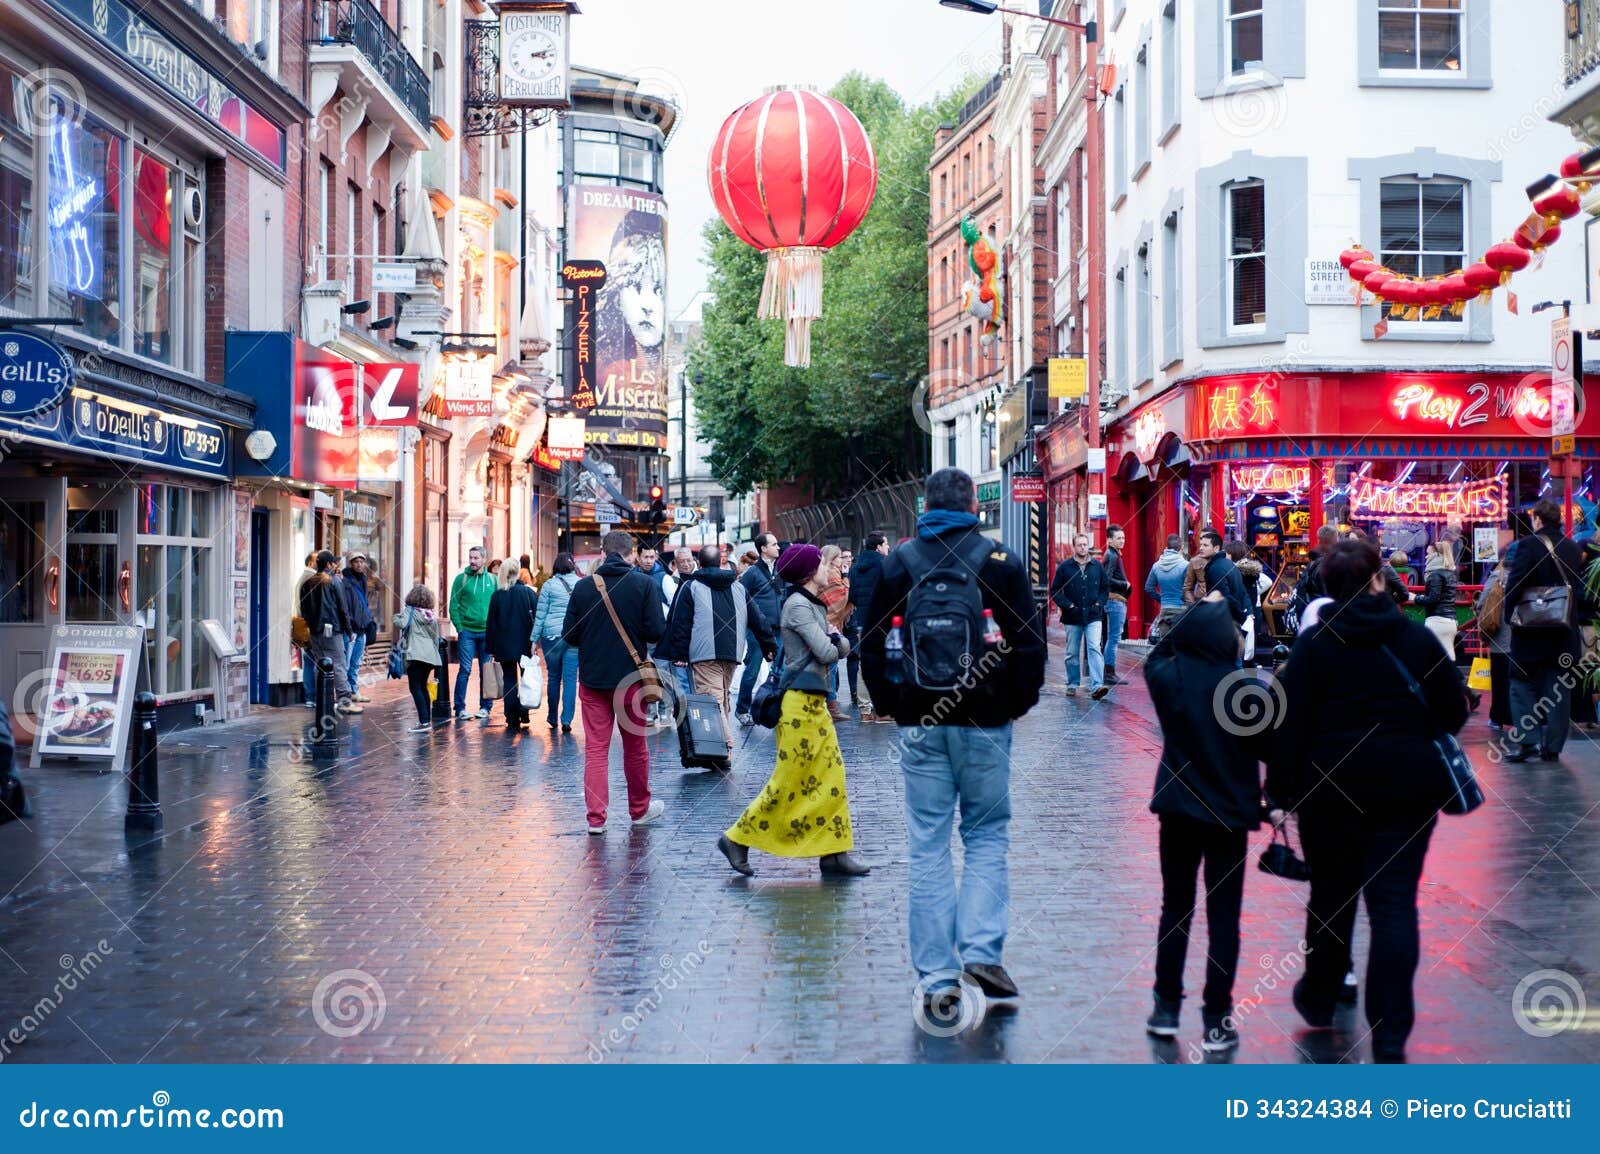 People stroll in Chinatown in London on October 10, 2013. With tens of restaurants, shops and bars, Chinatown is a popular touristic and nightlife area.